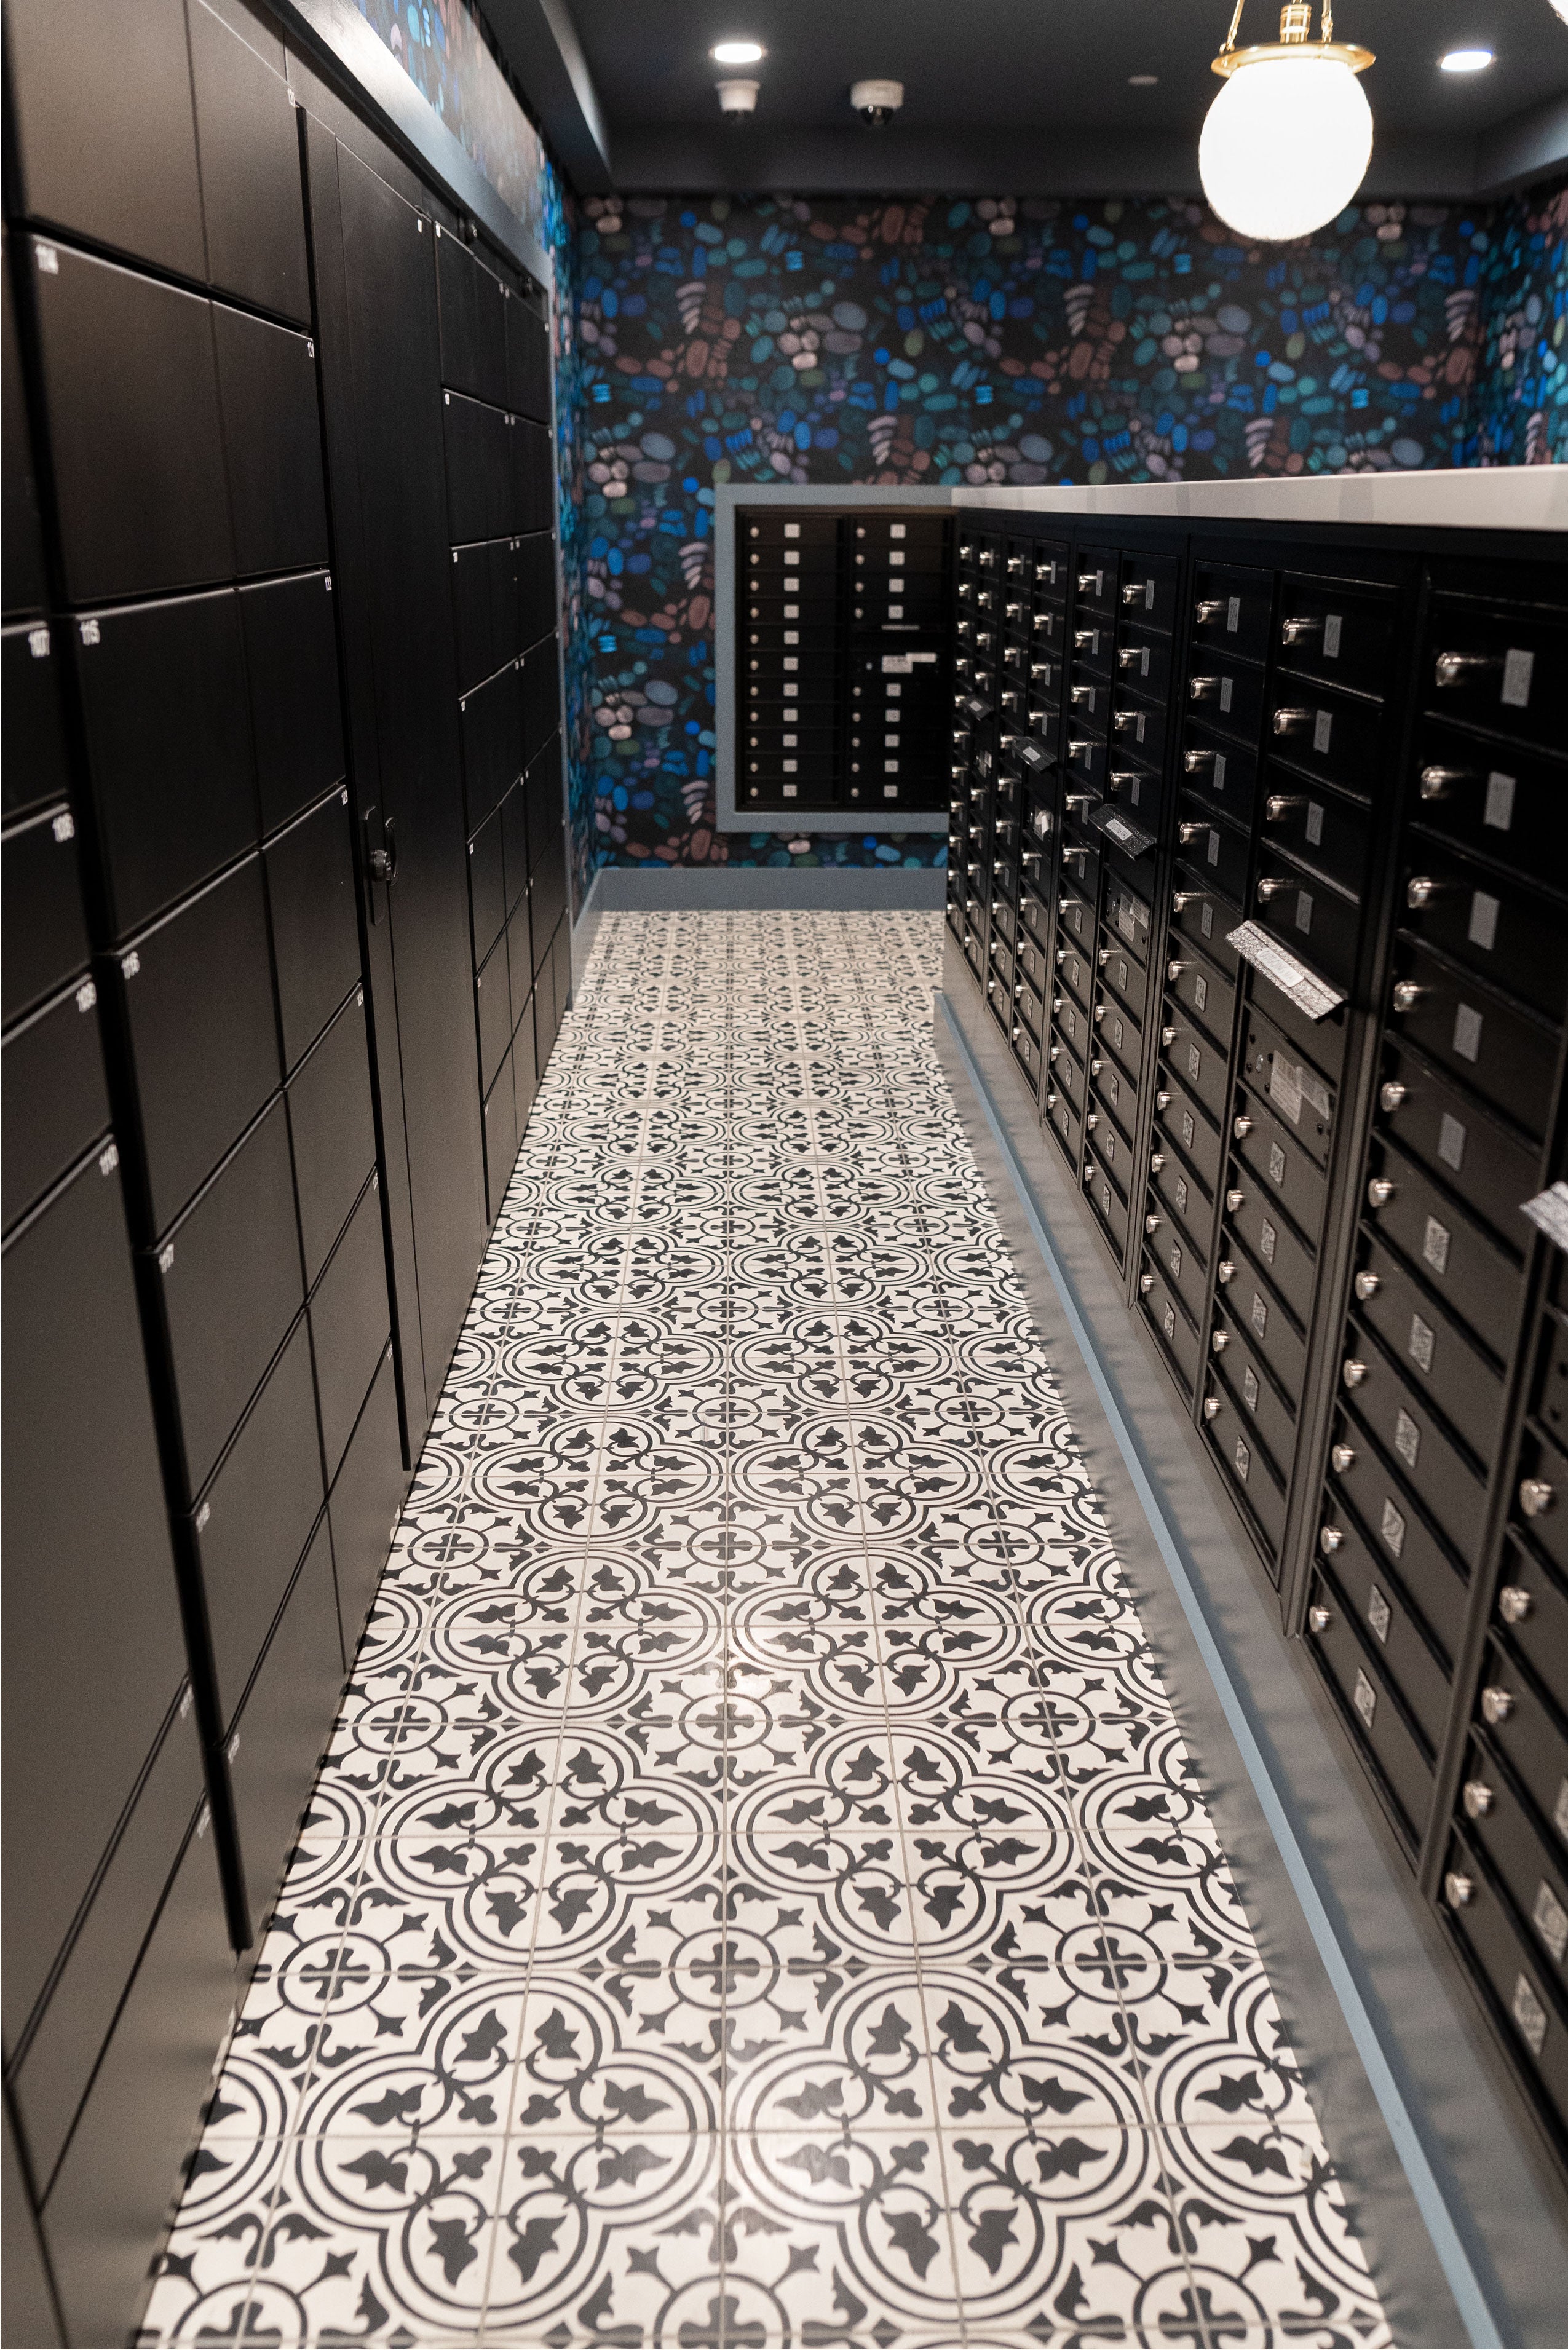 Mail room with pattern tile floor by clay imports